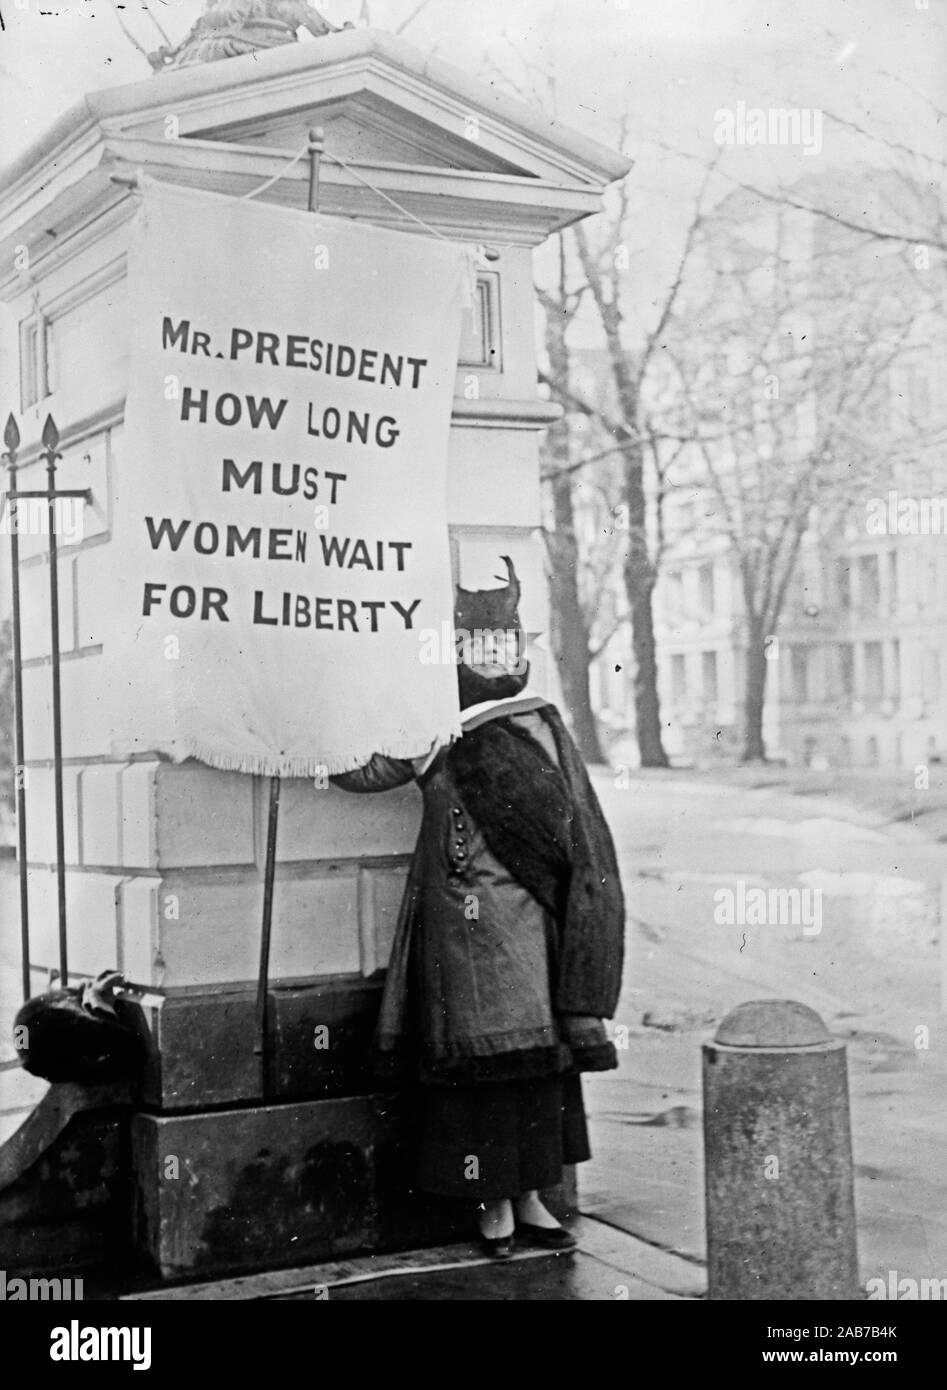 Women's suffrage movement - Mr. President How Long Must Women Wait for Liberty?  ca. 1917 Stock Photo